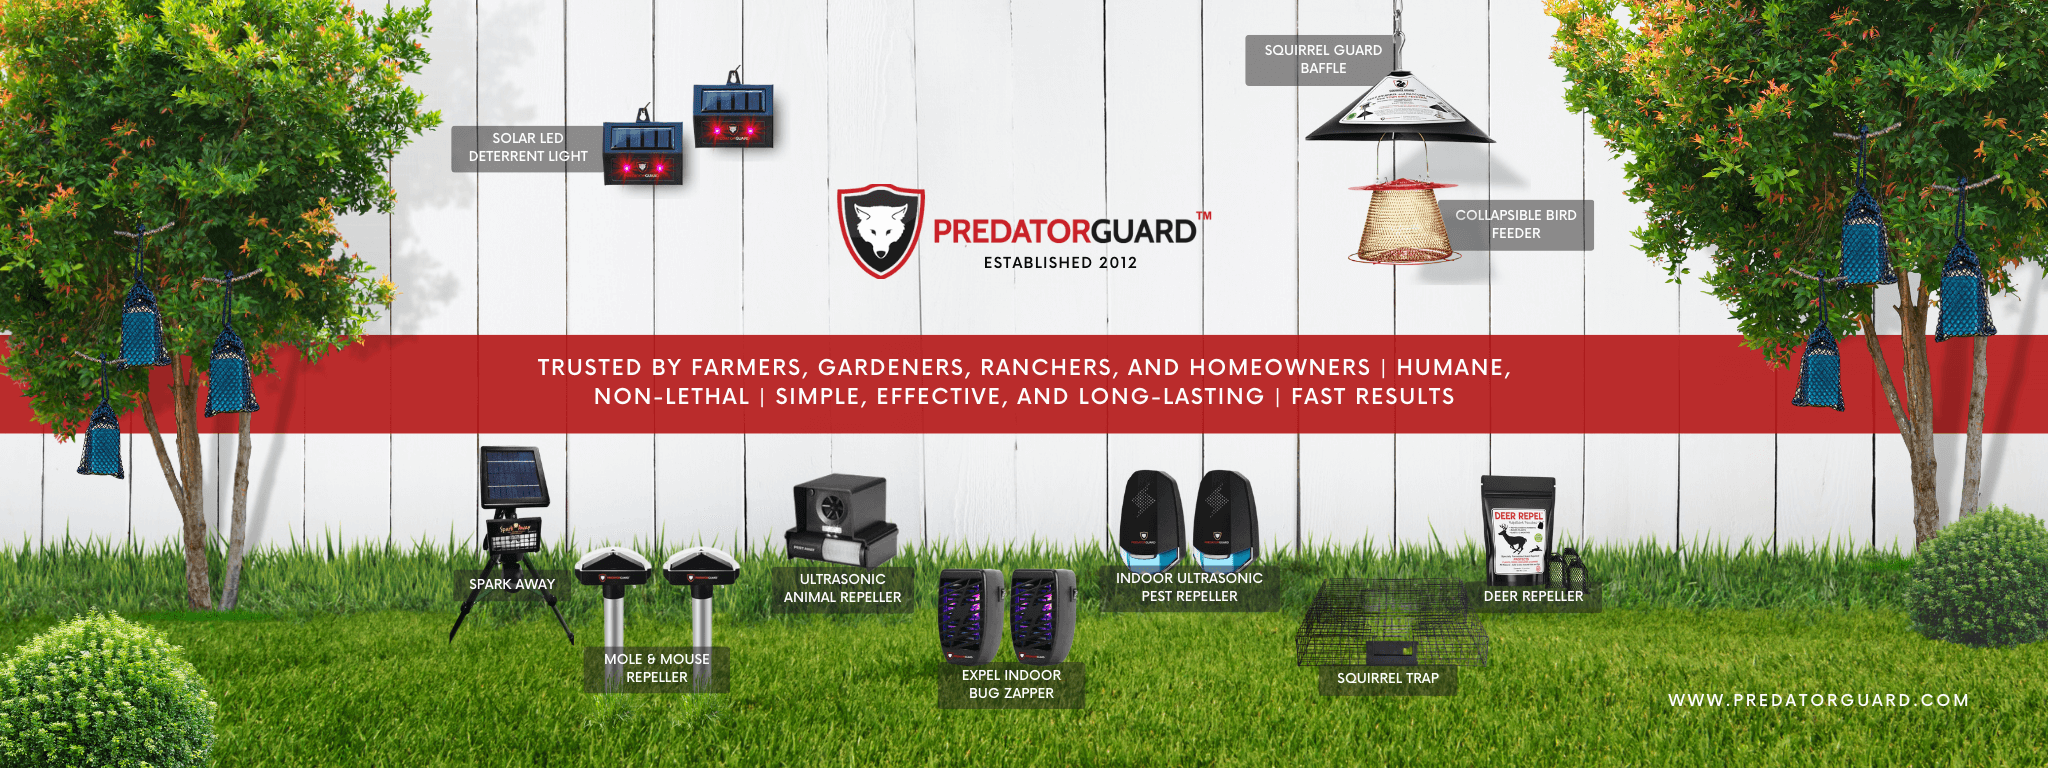 Predator Guard products attached on backyard fence, grass, and trees